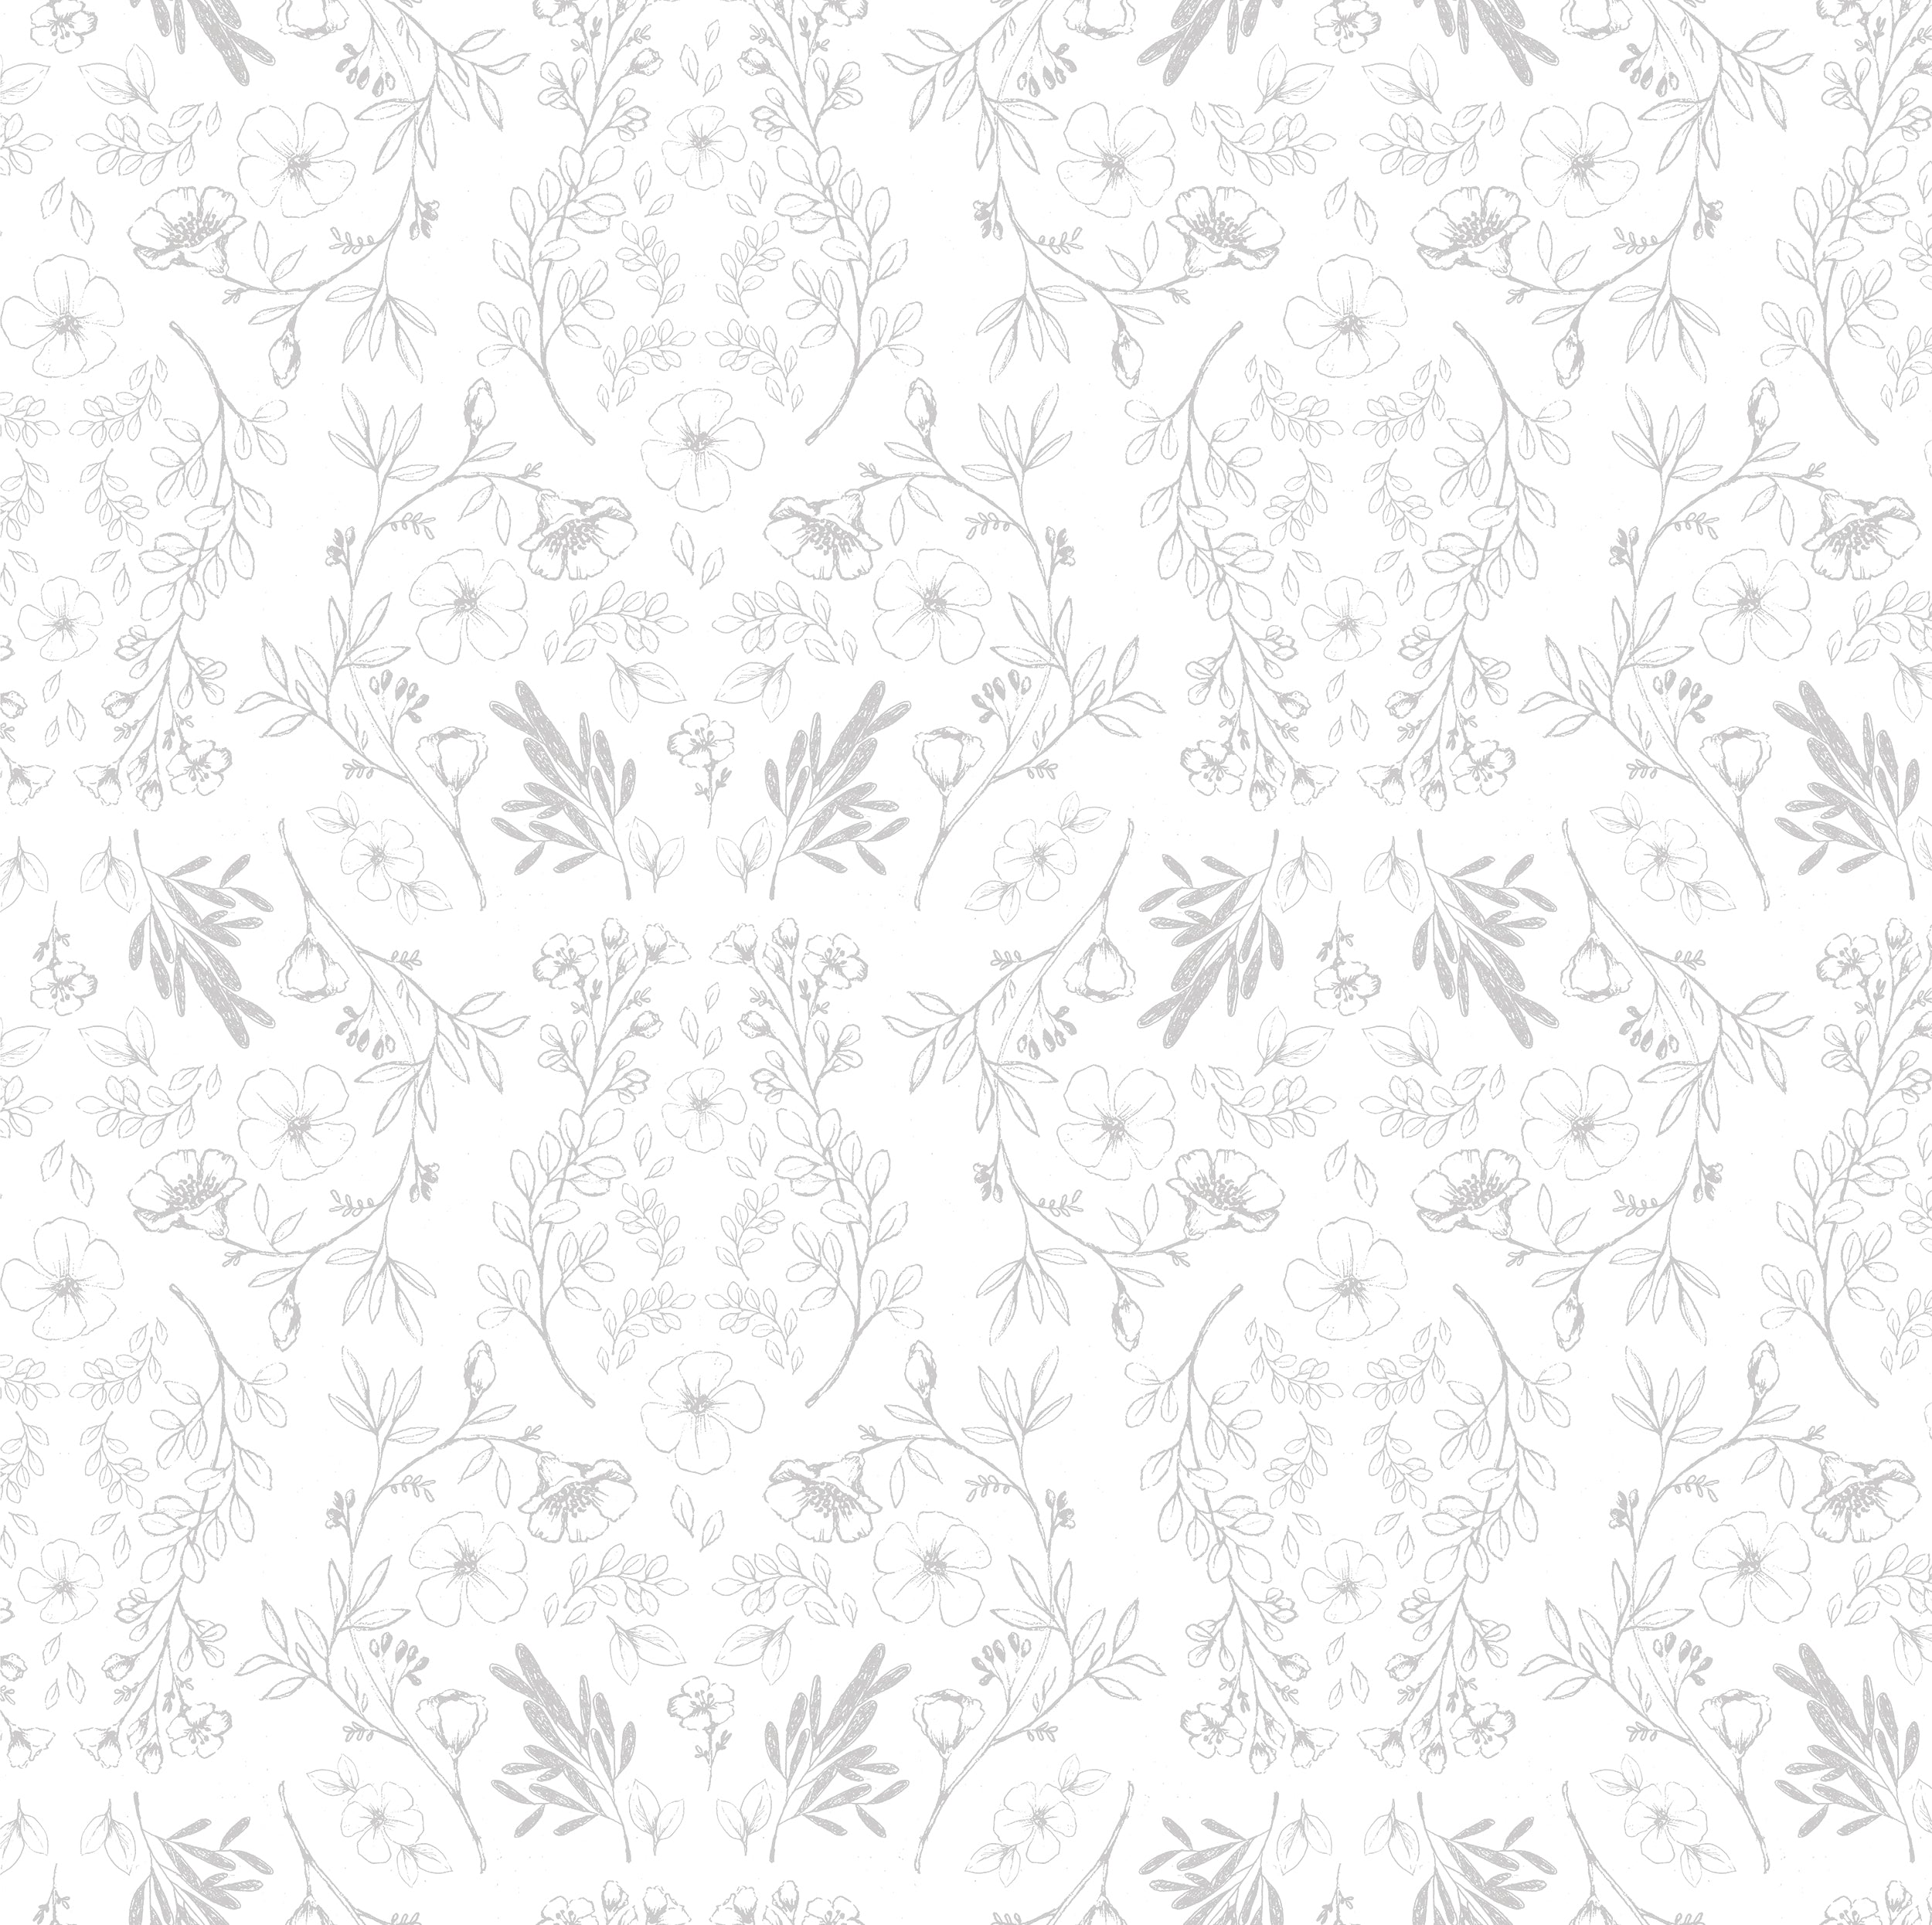 A close-up view of the Rustic Vintage Floral wallpaper showcasing the intricate floral designs in soft gray tones, ideal for adding a classic and romantic touch to any room